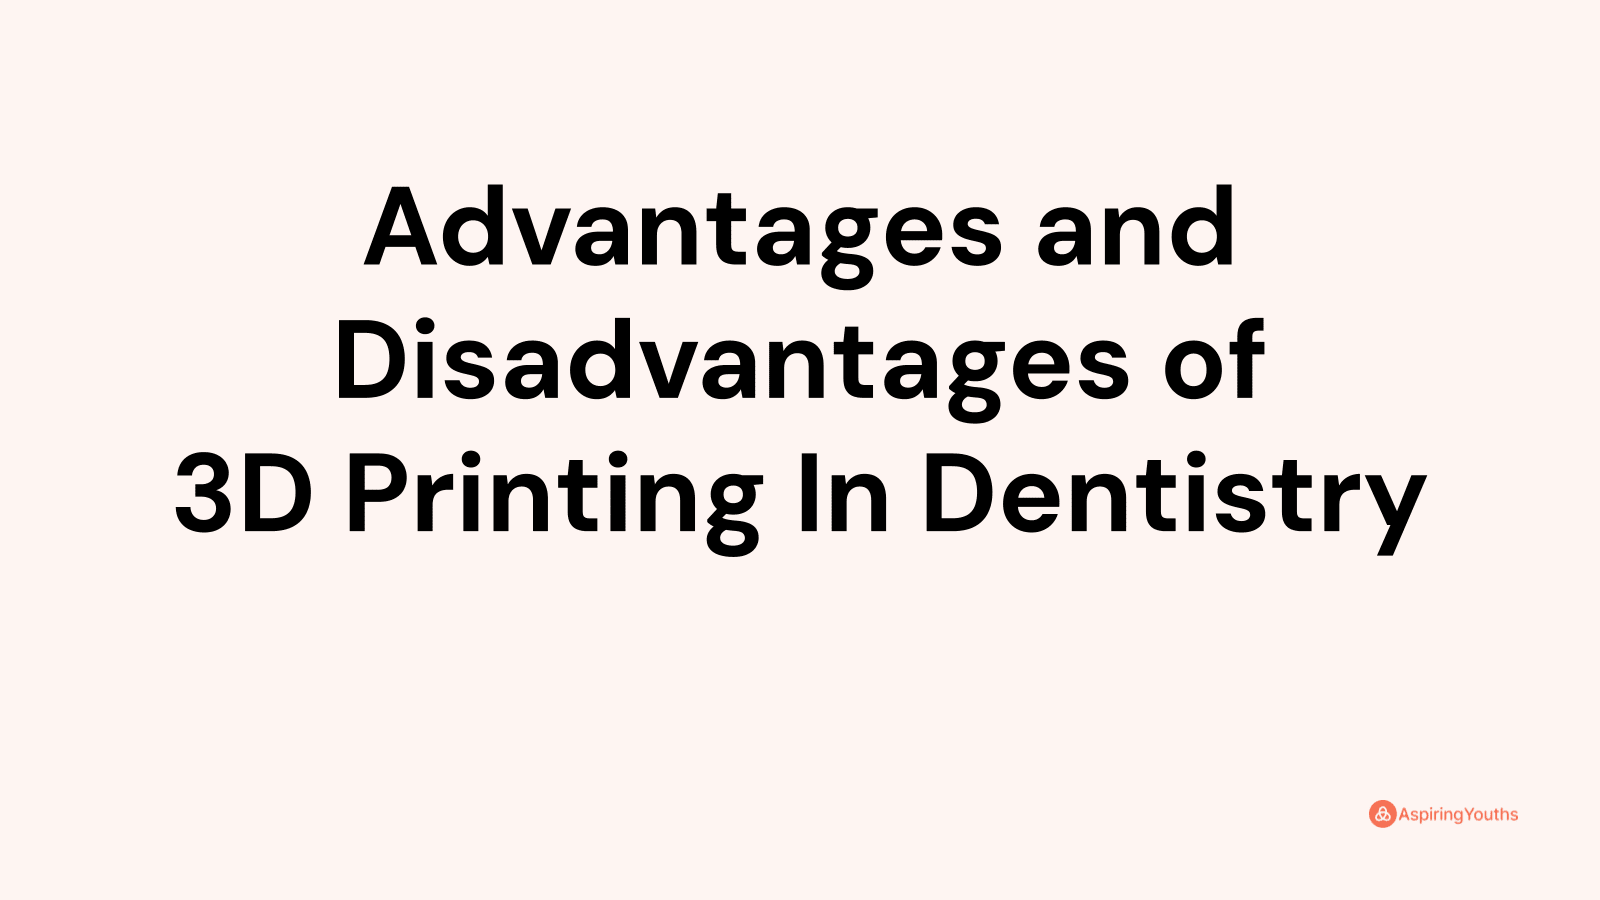 Advantages and disadvantages of 3D Printing In Dentistry